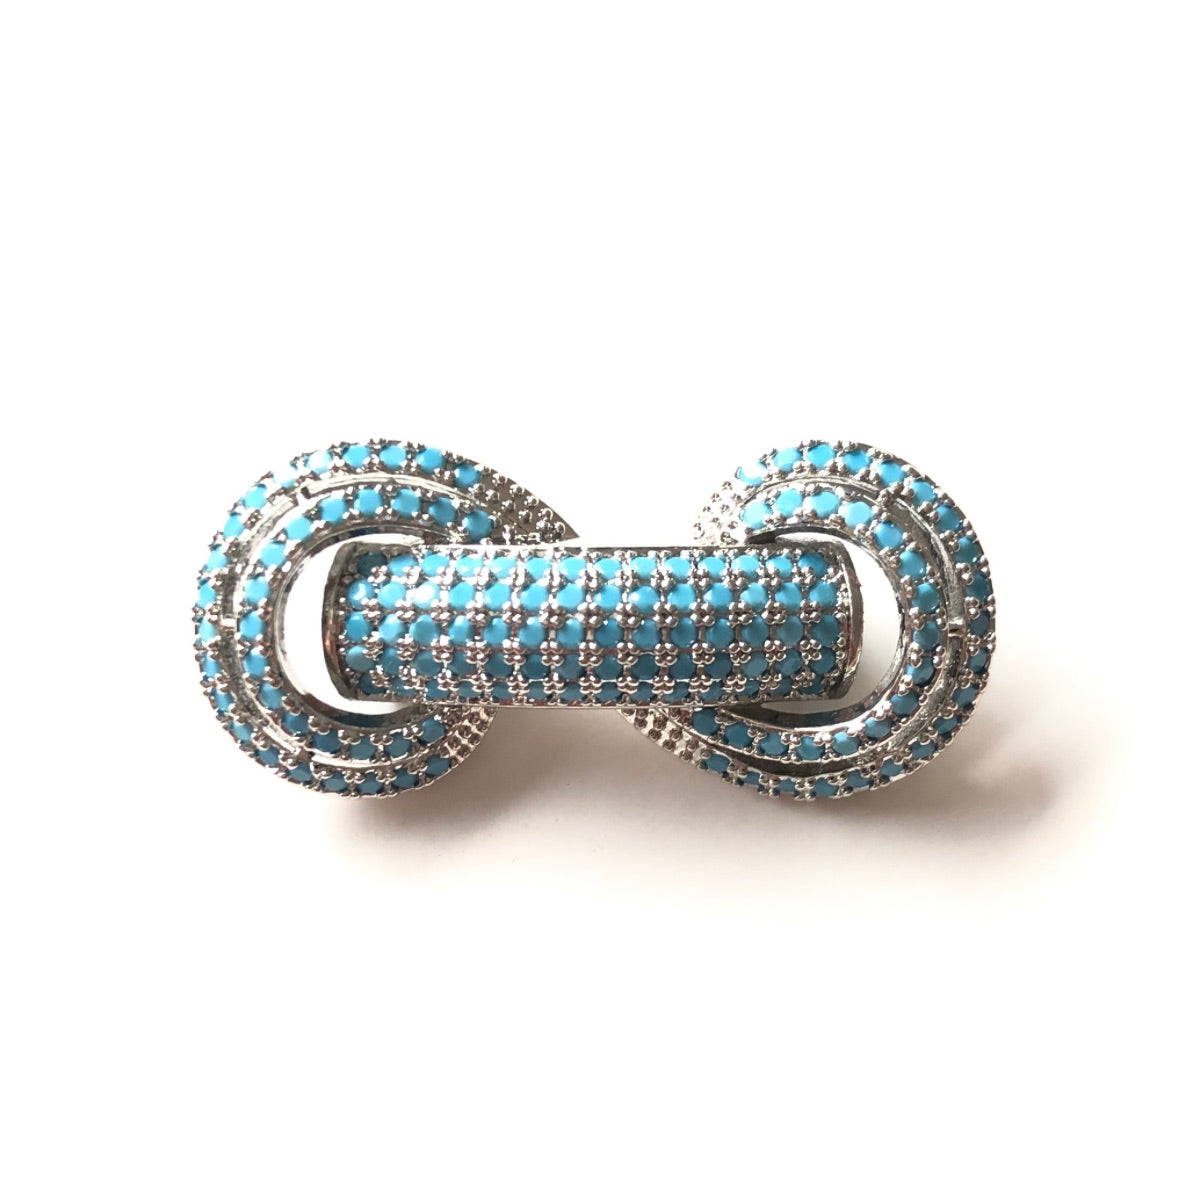 5pcs/lot 31*14.5*8mm Turquoise CZ Paved Tube Bar Spacers Silver CZ Paved Spacers Colorful Zirconia New Spacers Arrivals Tube Bar Centerpieces Charms Beads Beyond